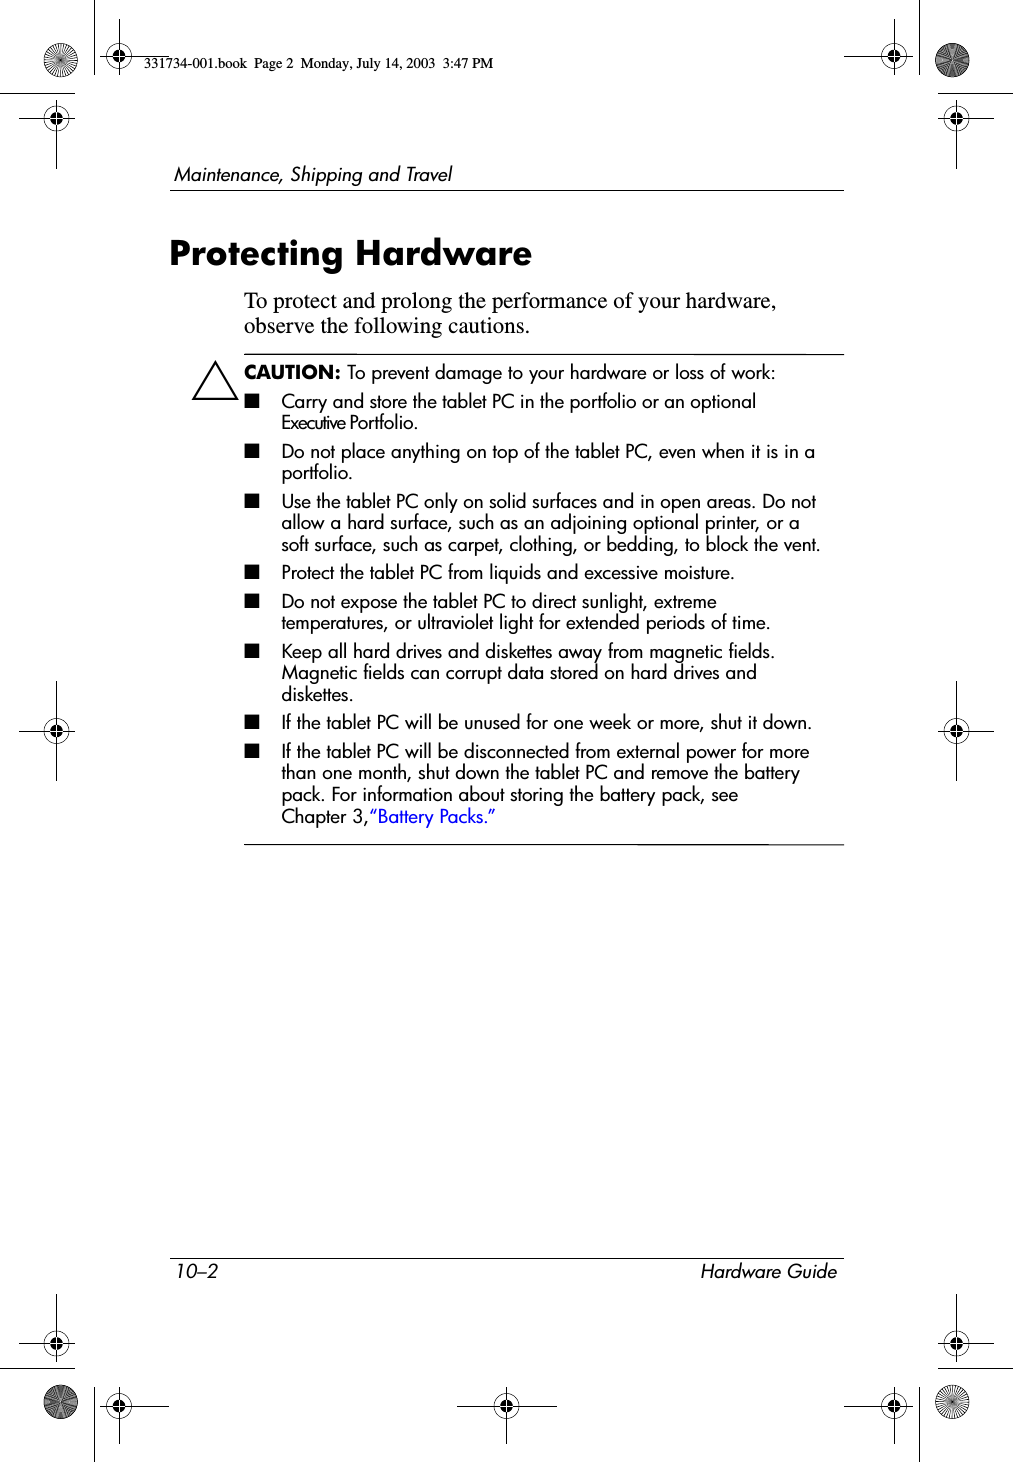 10–2 Hardware GuideMaintenance, Shipping and TravelProtecting HardwareTo protect and prolong the performance of your hardware, observe the following cautions.ÄCAUTION: To prevent damage to your hardware or loss of work:■ Carry and store the tablet PC in the portfolio or an optional Executive Portfolio.■Do not place anything on top of the tablet PC, even when it is in a portfolio.■Use the tablet PC only on solid surfaces and in open areas. Do not allow a hard surface, such as an adjoining optional printer, or a soft surface, such as carpet, clothing, or bedding, to block the vent.■Protect the tablet PC from liquids and excessive moisture.■Do not expose the tablet PC to direct sunlight, extreme temperatures, or ultraviolet light for extended periods of time.■Keep all hard drives and diskettes away from magnetic fields. Magnetic fields can corrupt data stored on hard drives and diskettes.■If the tablet PC will be unused for one week or more, shut it down.■If the tablet PC will be disconnected from external power for more than one month, shut down the tablet PC and remove the battery pack. For information about storing the battery pack, see Chapter 3,“Battery Packs.”331734-001.book  Page 2  Monday, July 14, 2003  3:47 PM